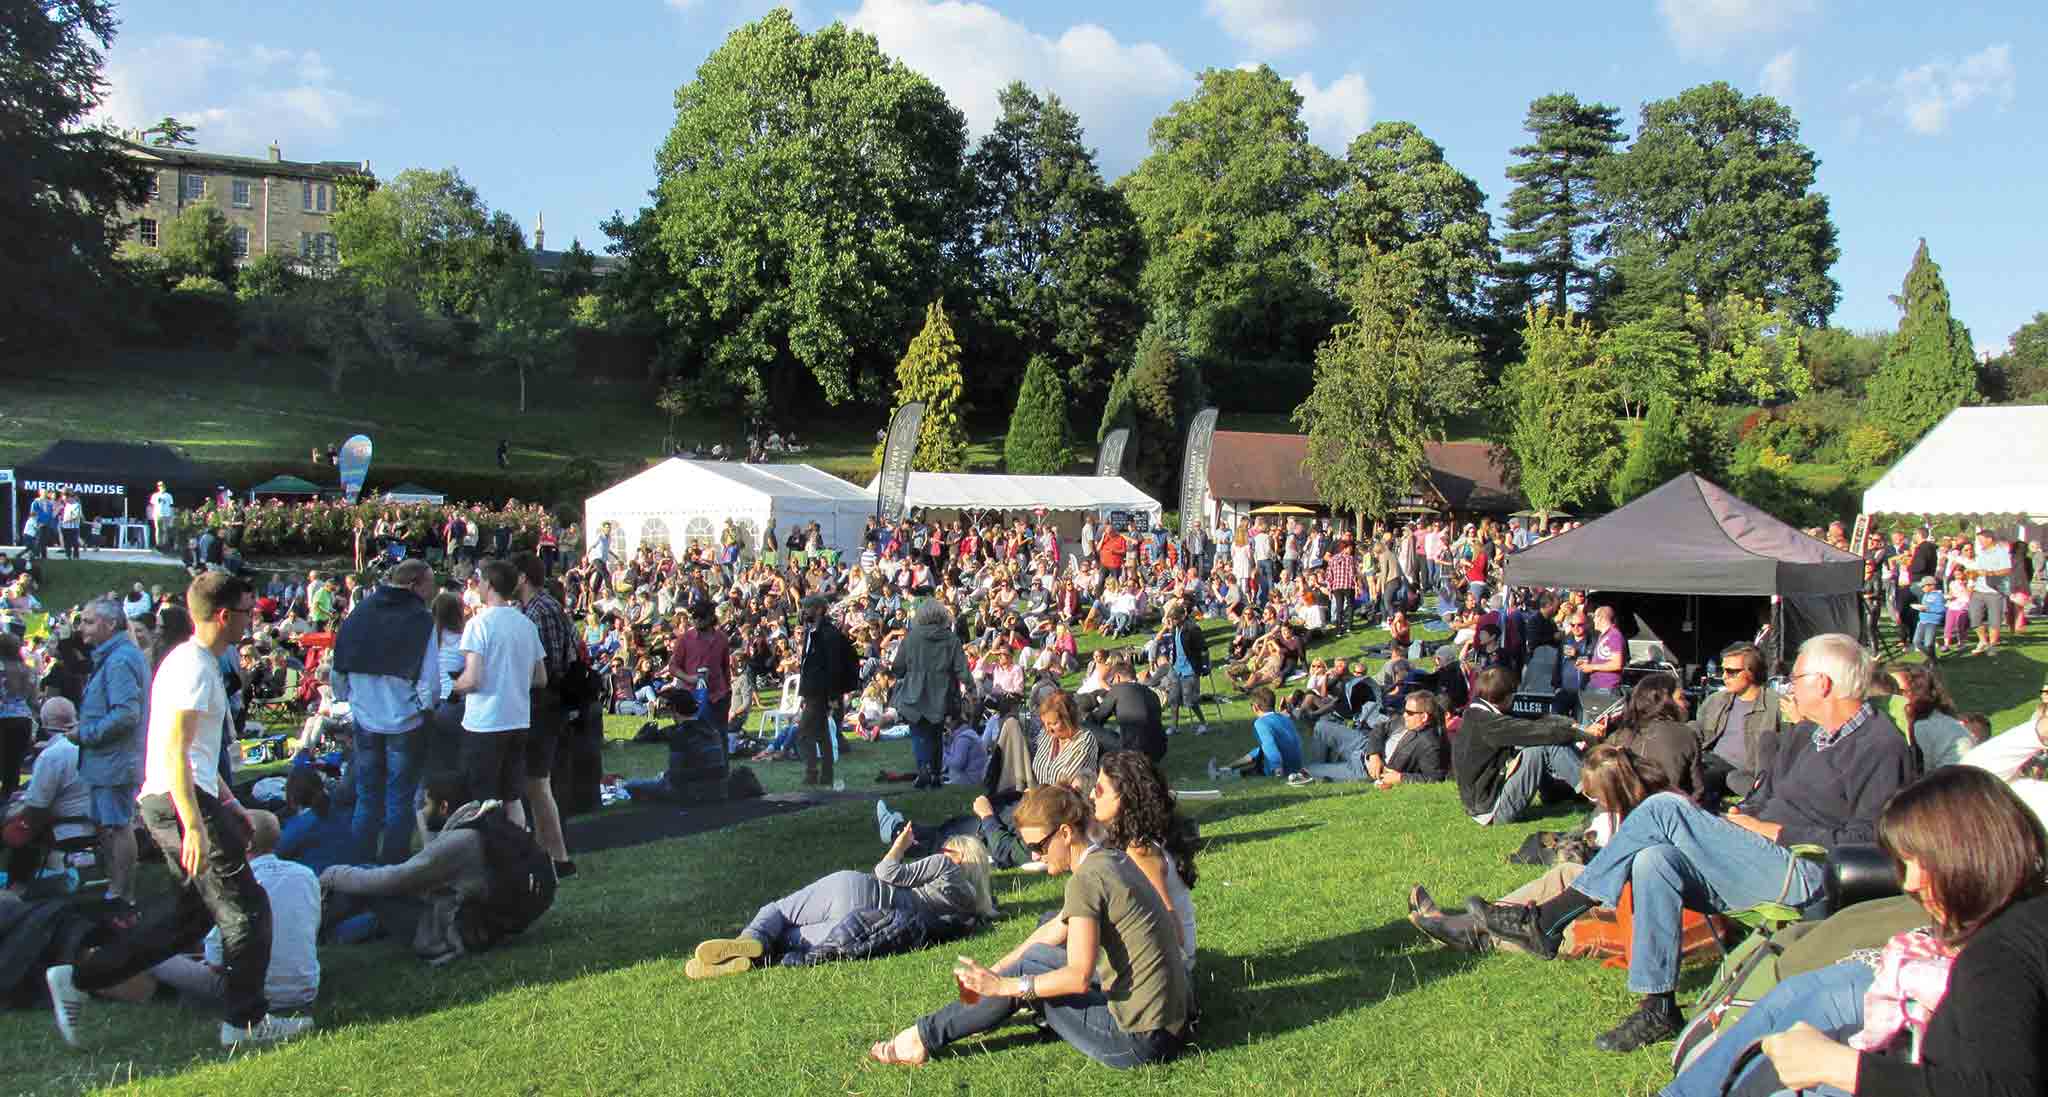 Festival returns to its home turf and adds a new venue